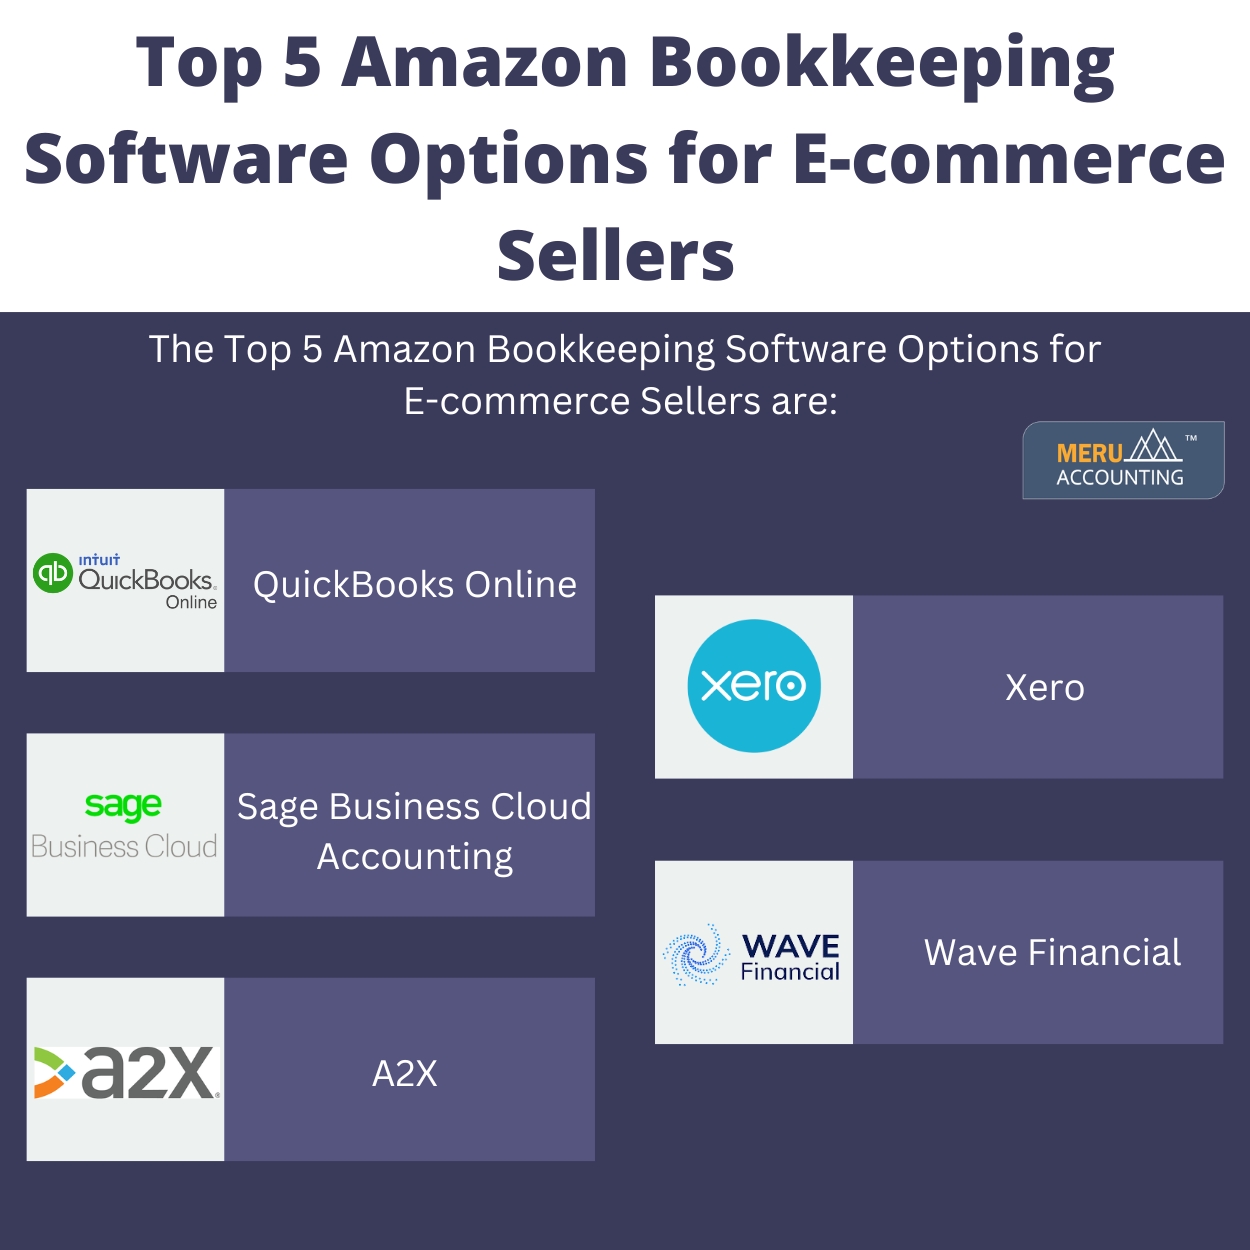 Top 5 Amazon Bookkeeping Software Options for E-commerce Sellers